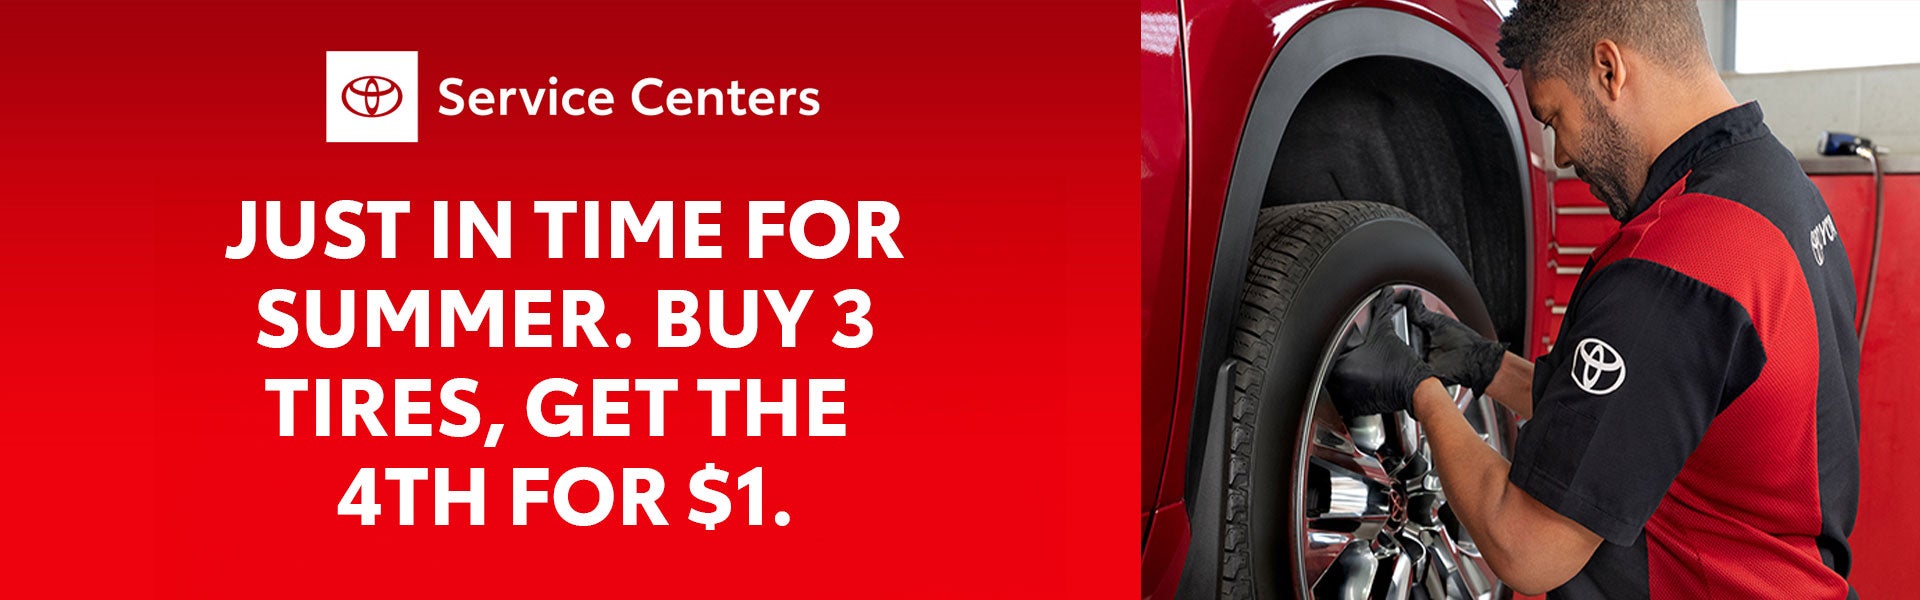 4th tire for $1